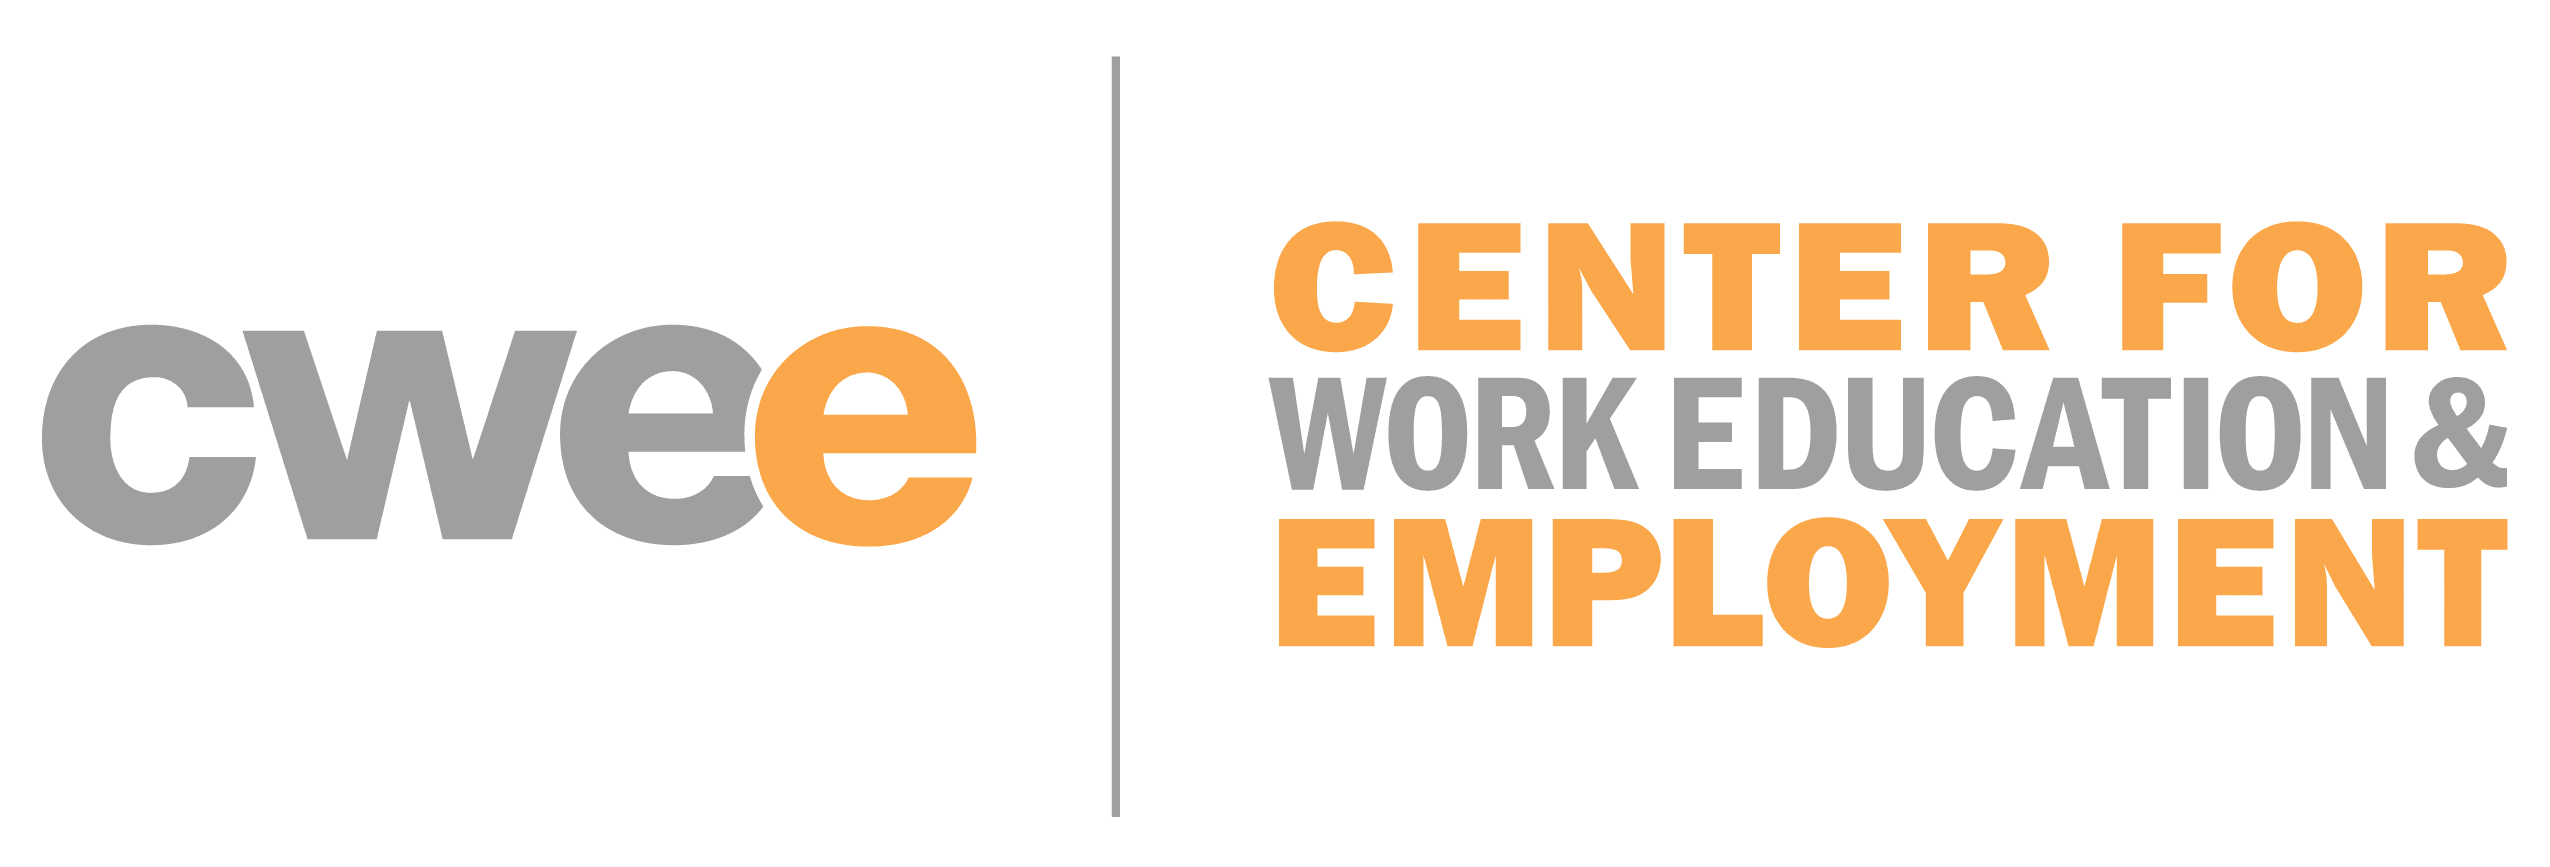 CWEE: Center for Work Education & Employment logo